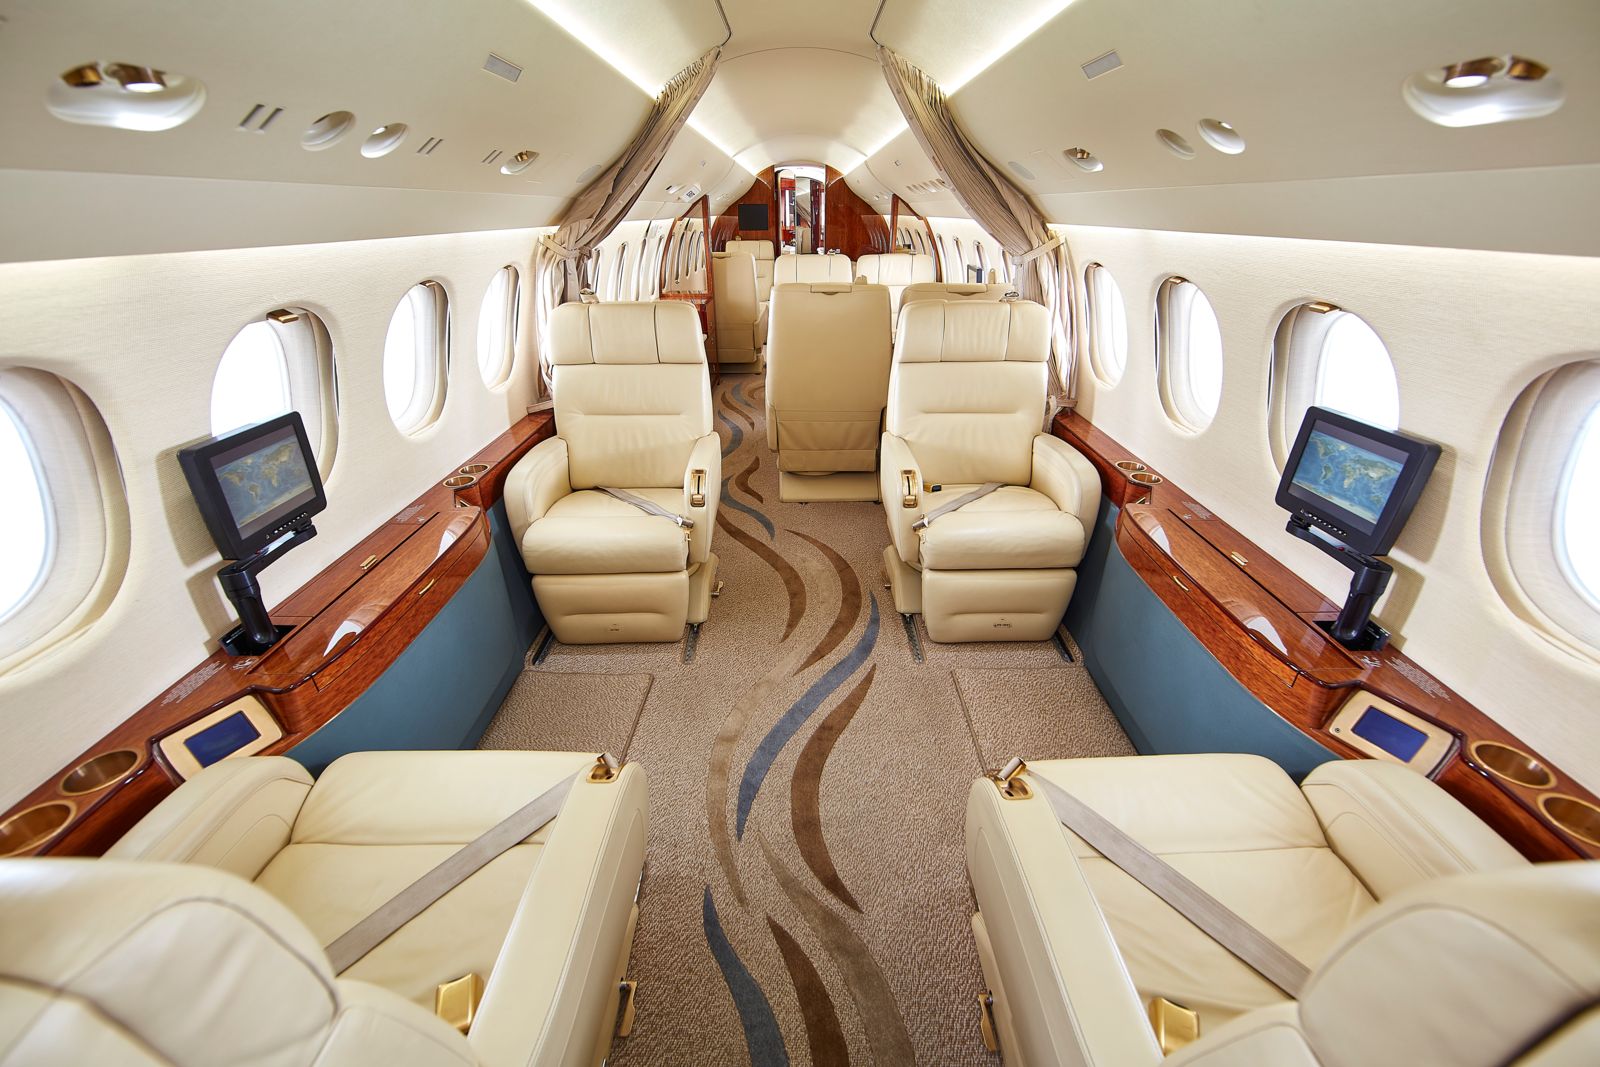 Dassault Falcon 7X  S/N 83 for sale | gallery image: /userfiles/images/F7X_sn58/fwd%20aft.jpg